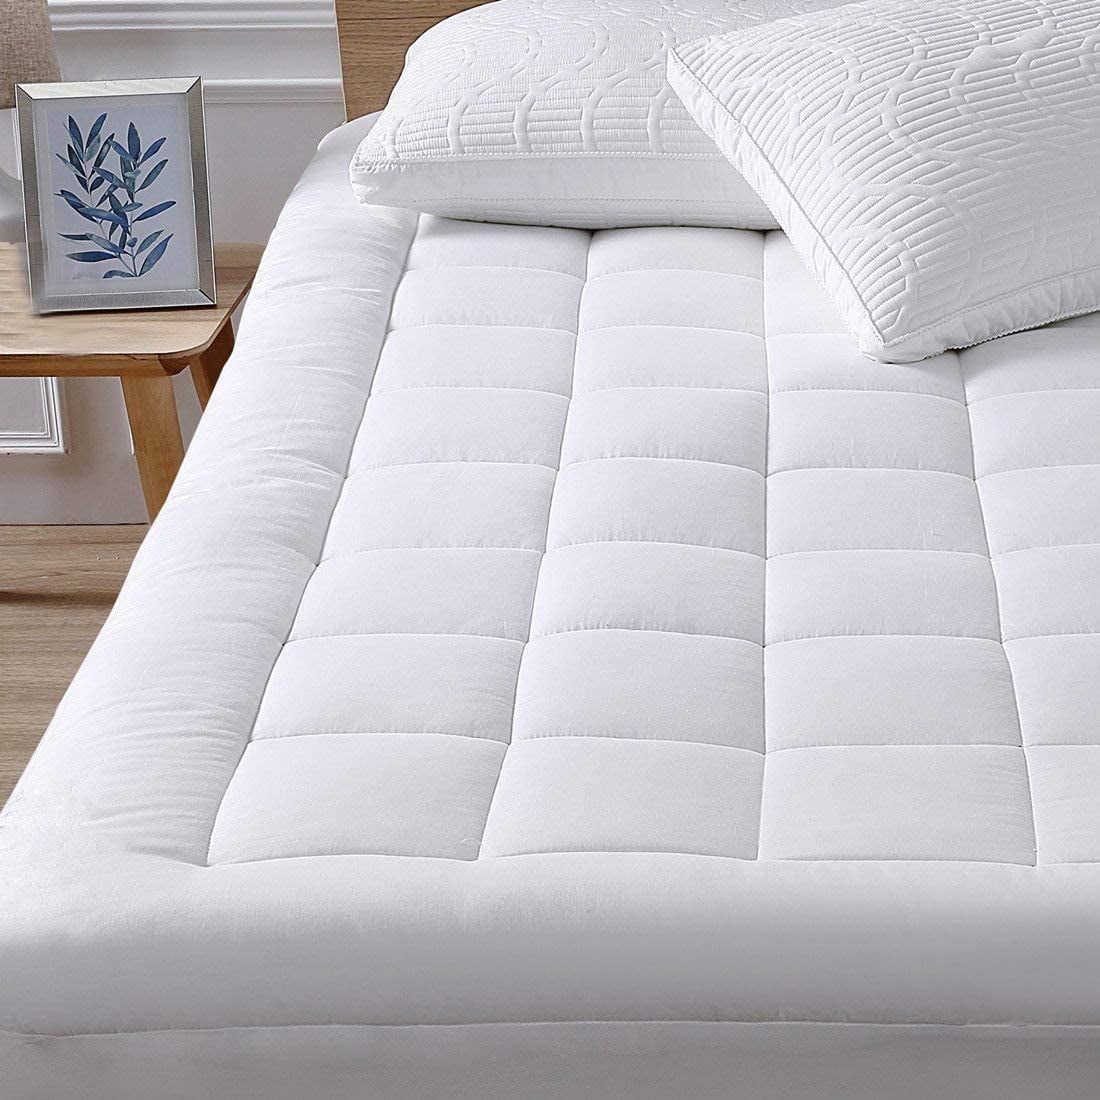 King Size Mattress Pad Cover Snow Down Alternative Pad Top Topper Luxury Bed 